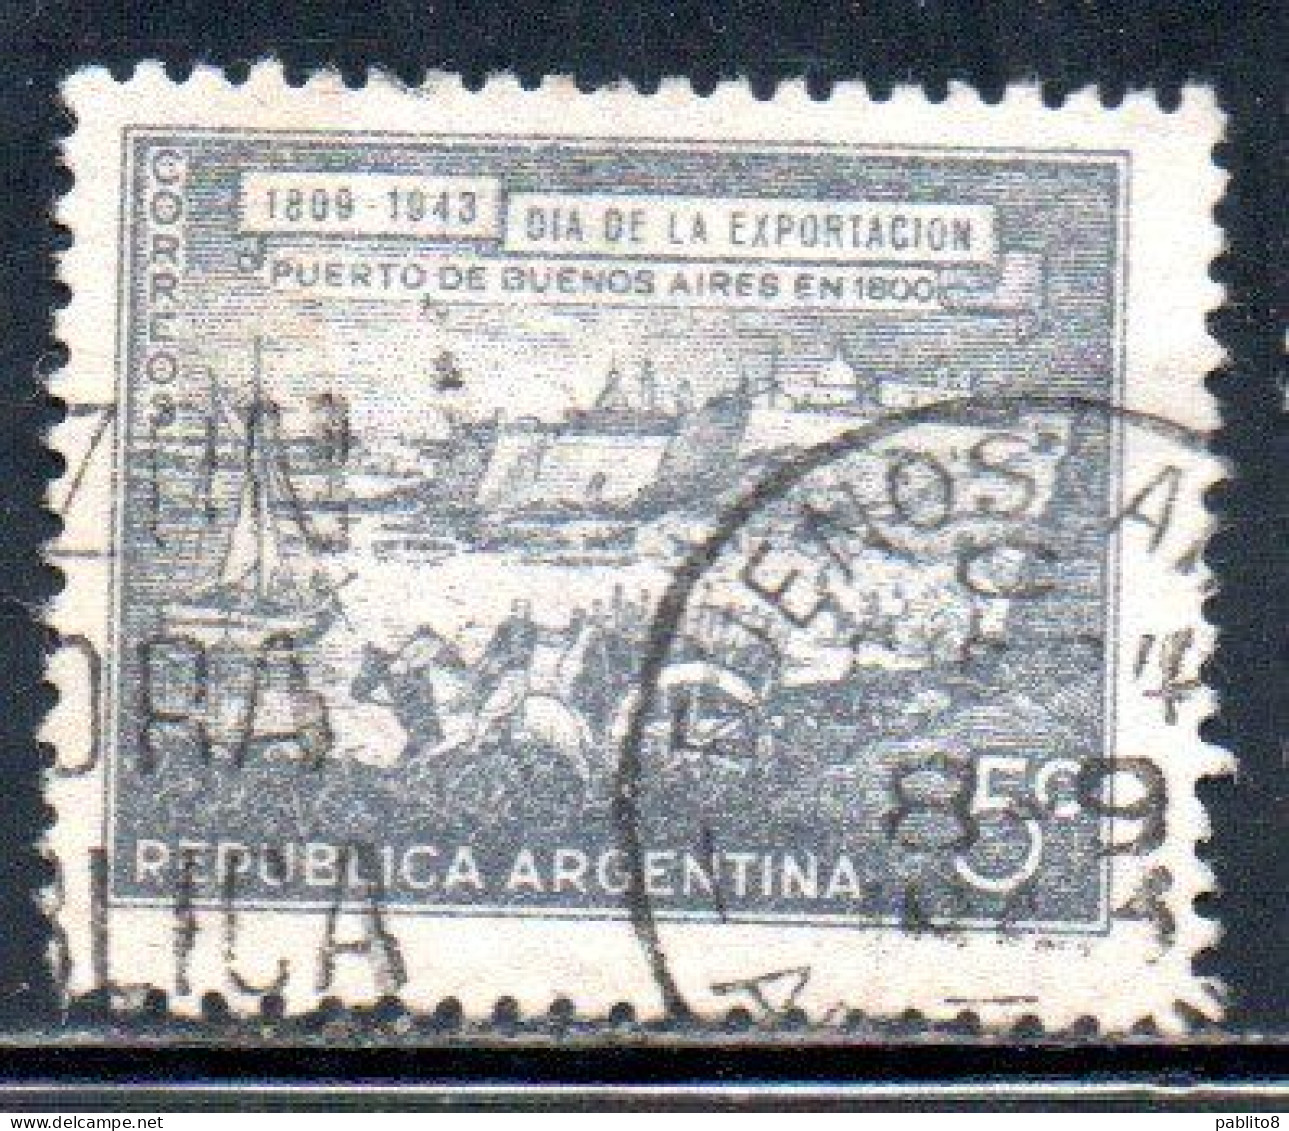 ARGENTINA 1943 DAY OF EXPORTS PORT OF BUENOS AIRES IN 1800  5c USED USADO OBLITERE' - Usati